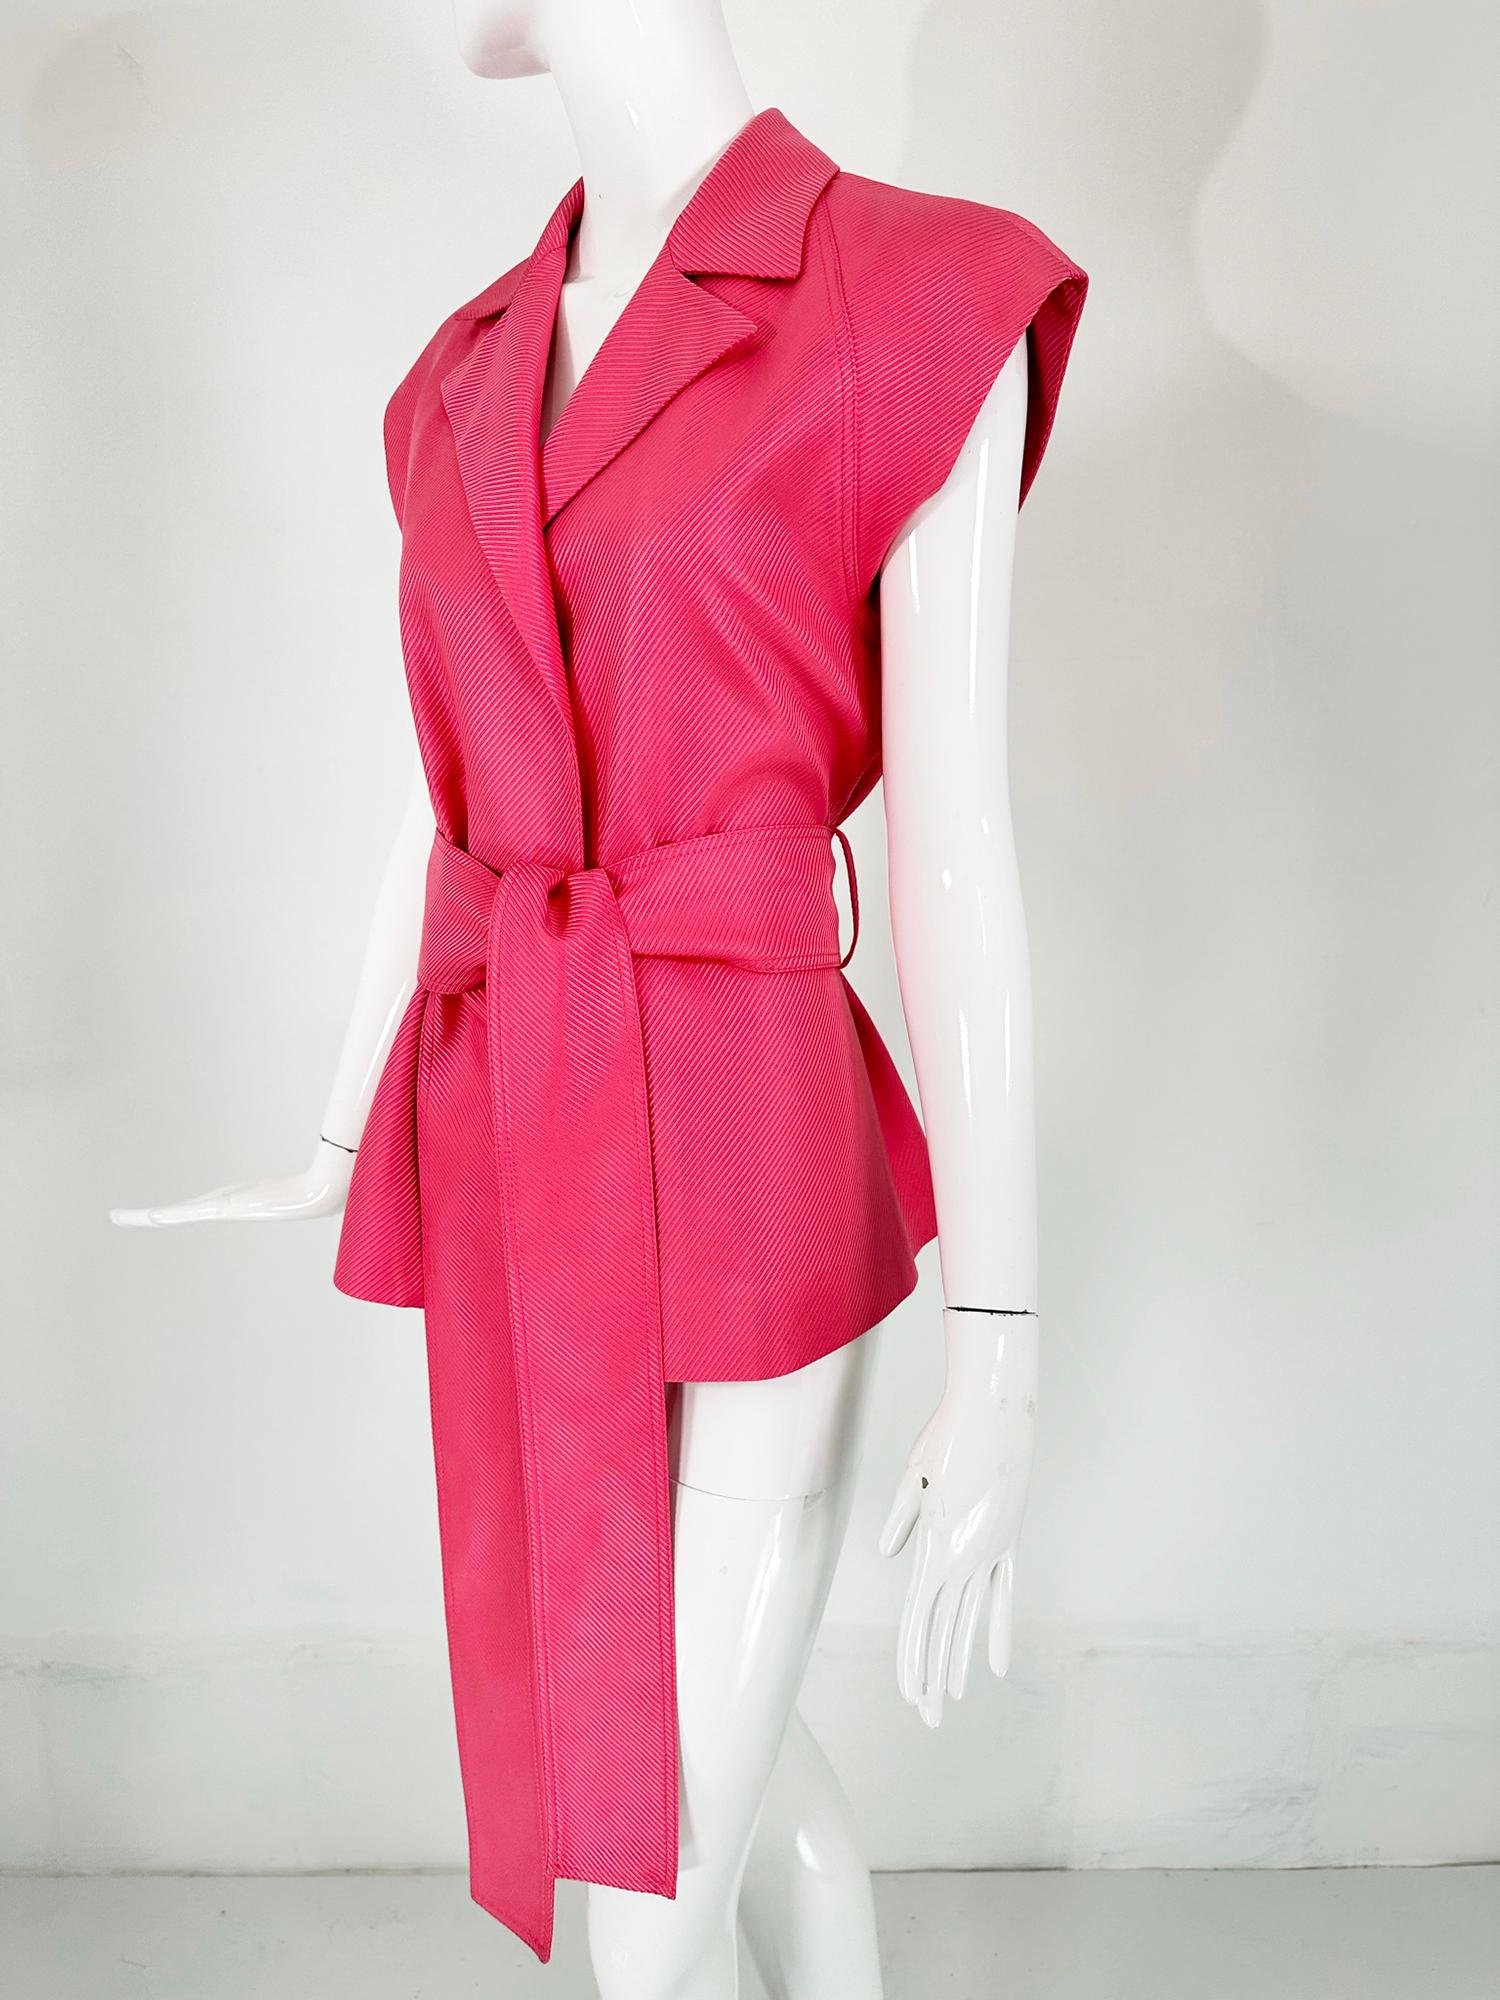 Gianni Versace Couture Pink Silk Twill Cap Sleeve Belted Wrap Jacket 42 5